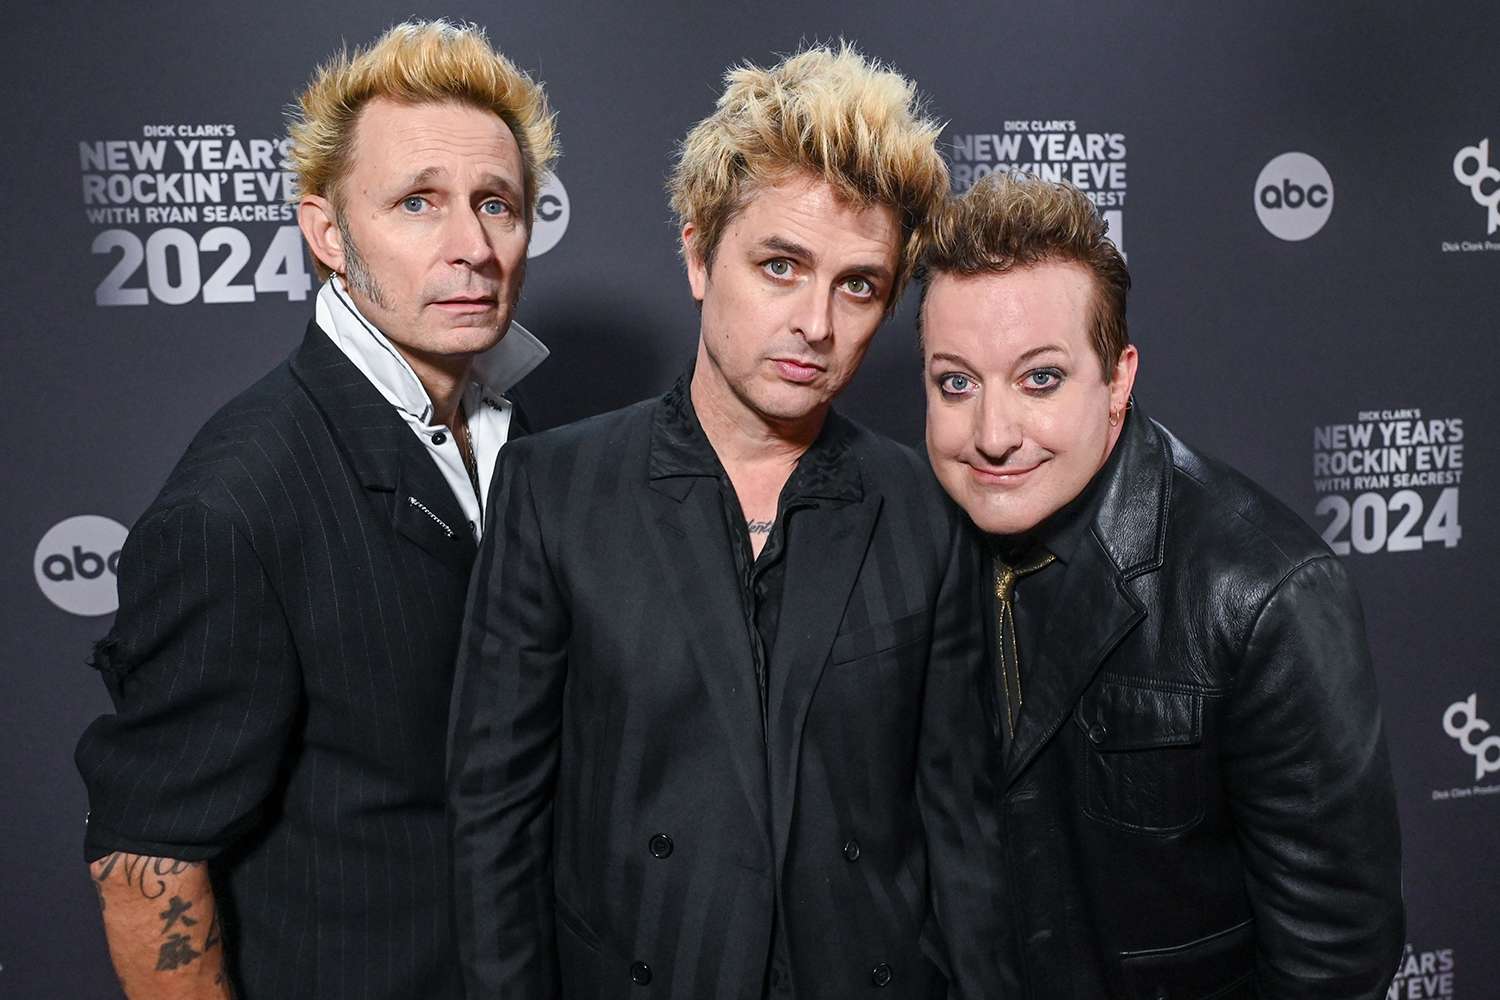 December 31, 2023, Mike Dirnt, Billy Joe Armstrong and Tre Cool of Green Day arrive at Dick Clark's New Year's Rockin' Eve with Ryan Seacrest 2024 in Hollywood, California. 